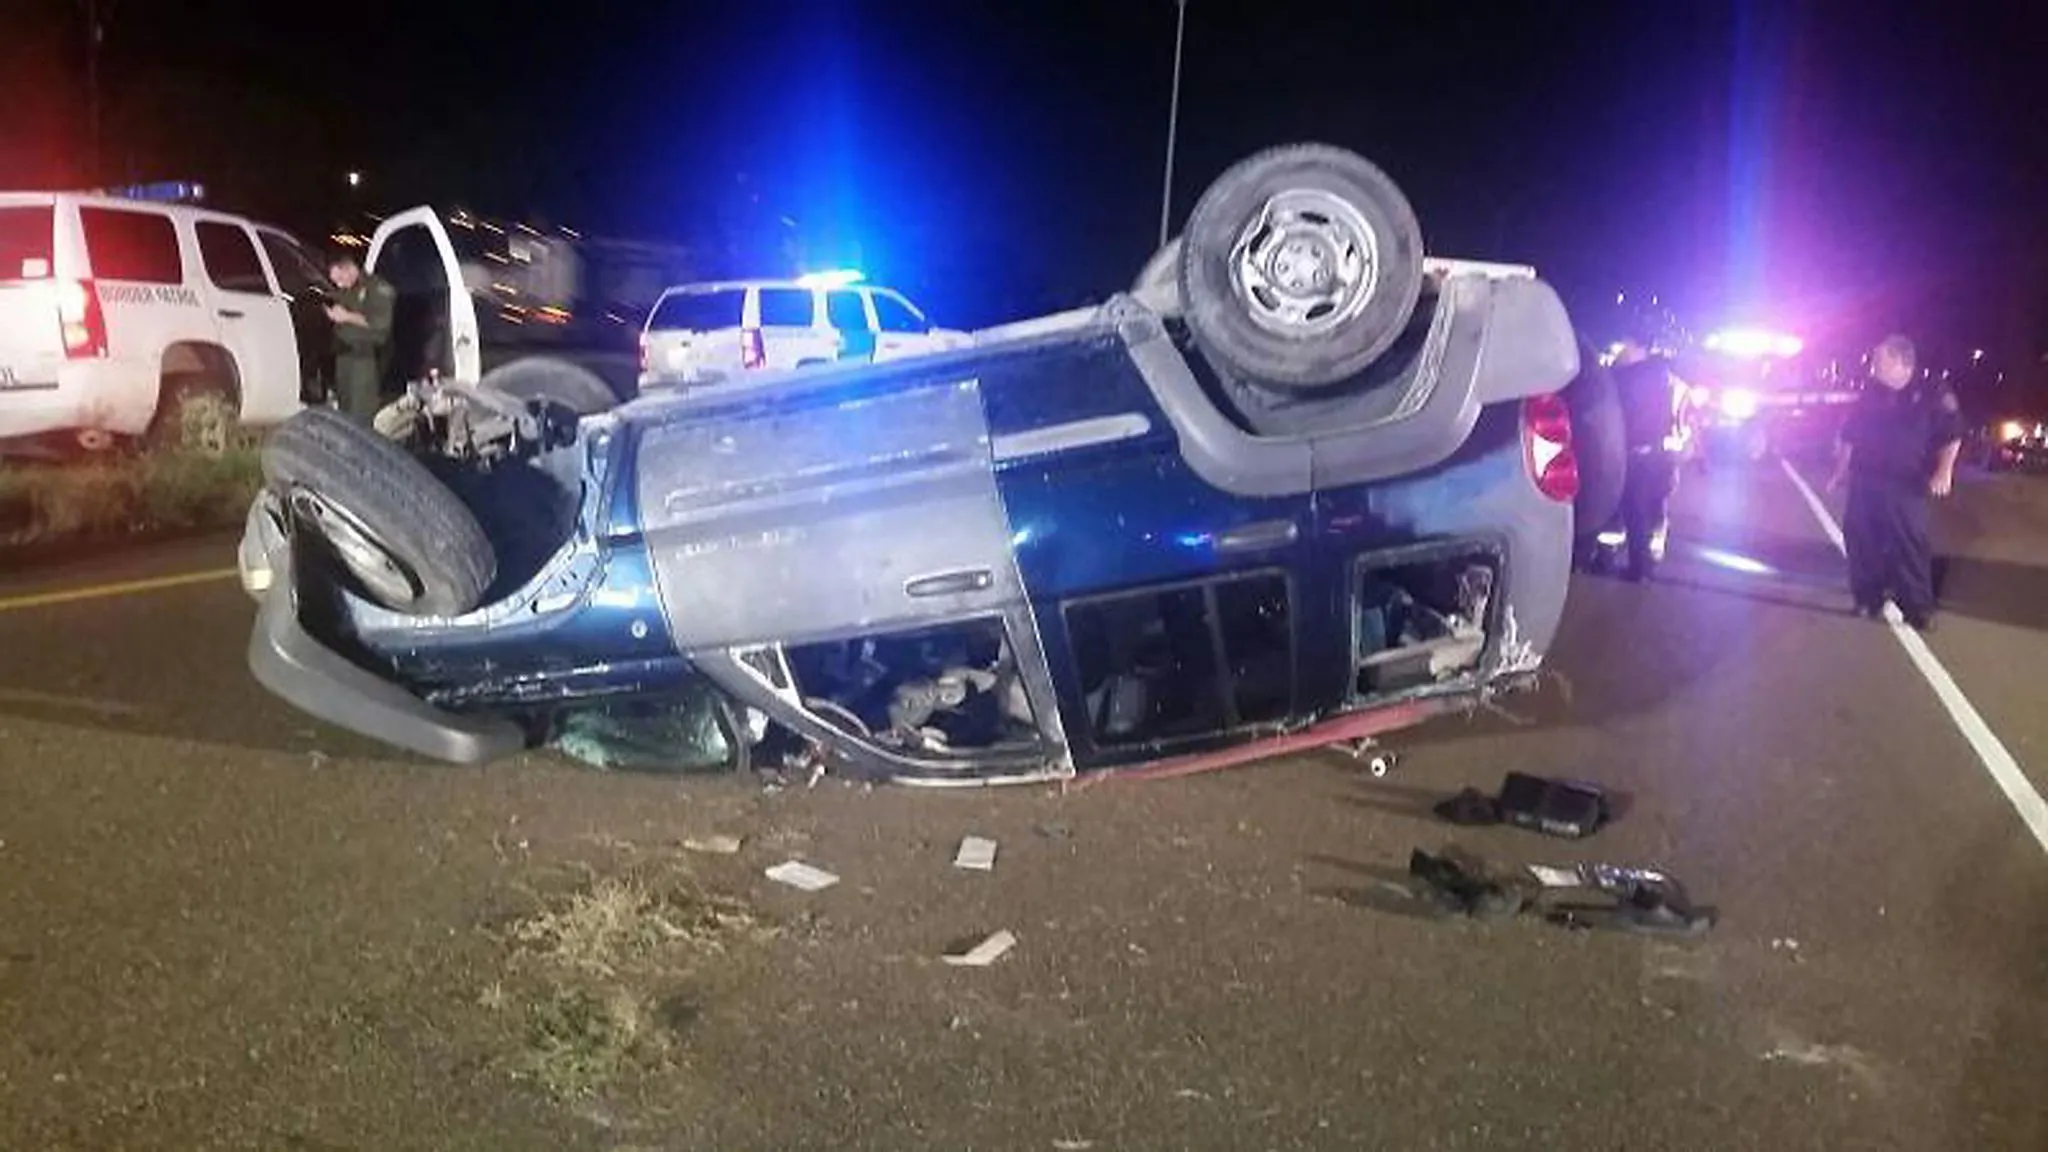 Rio_Grande_Valley_Border_Patrol_agents_provide_first_aid_to_accident_victim-2